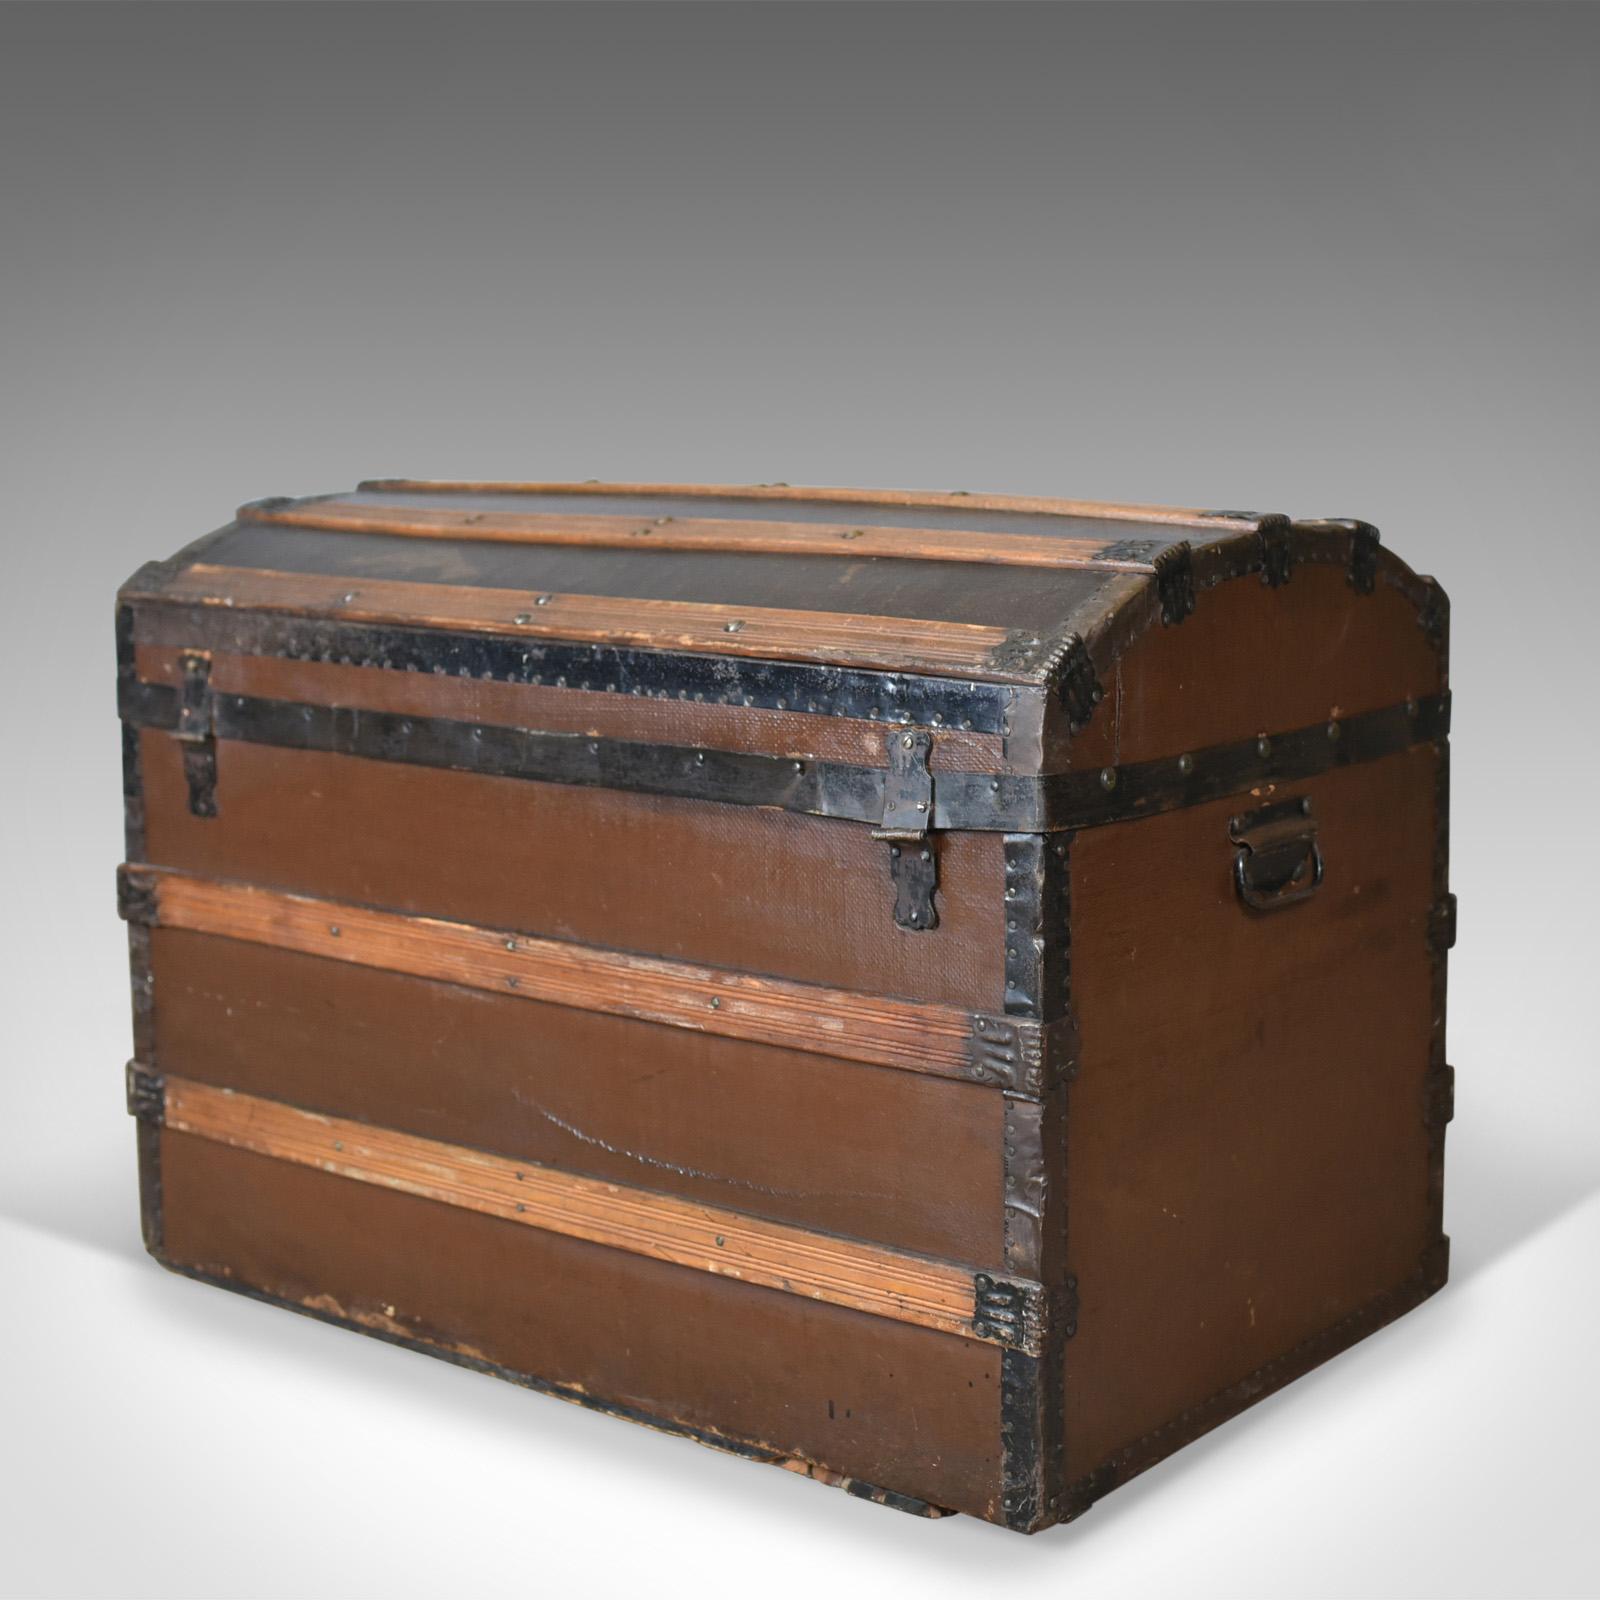 Wood Antique Carriage Chest, Victorian, Dome Topped Trunk, 19th Century, circa 1890